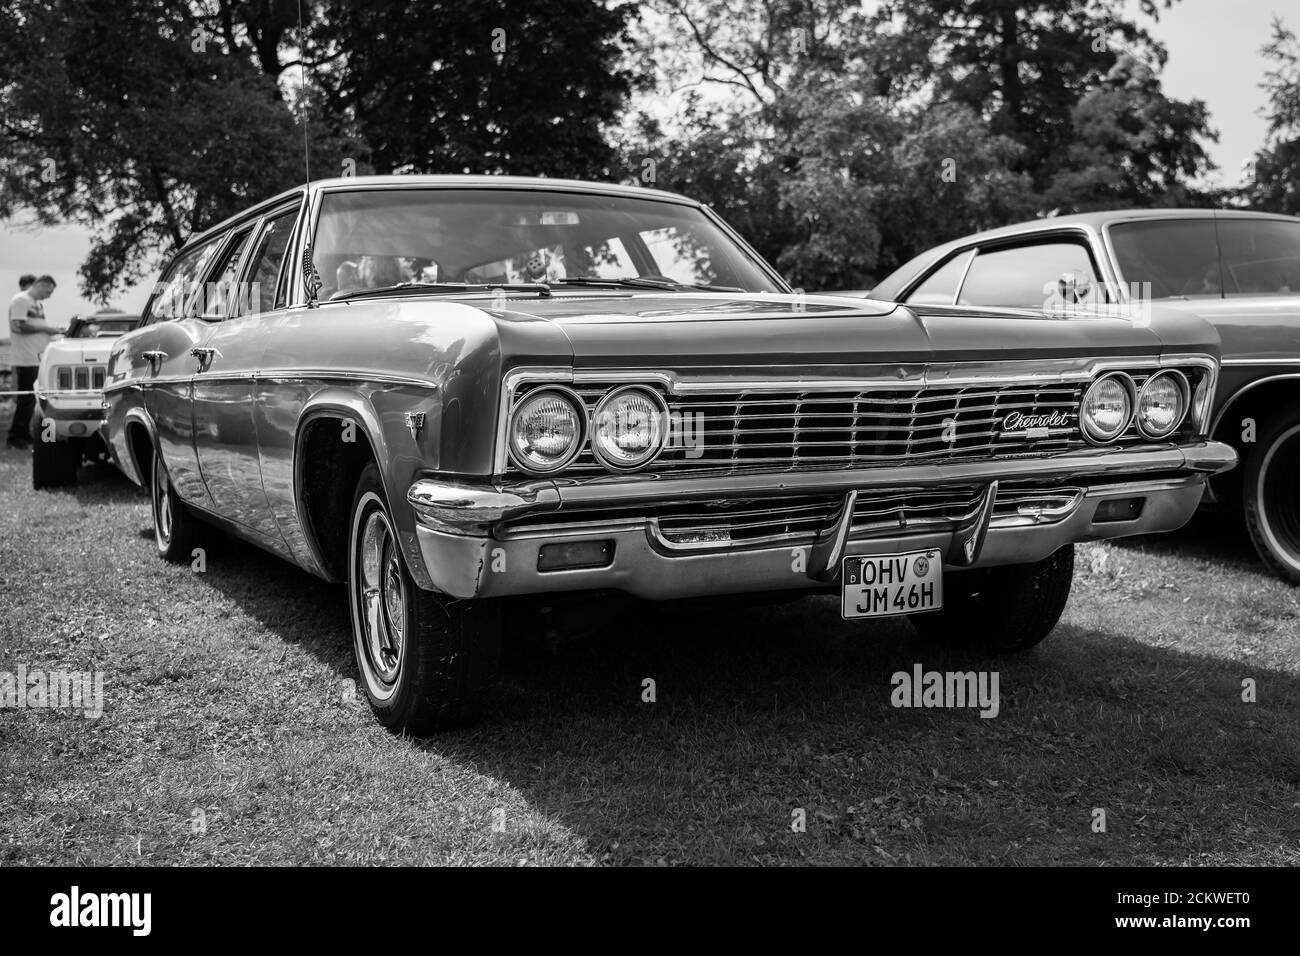 DIEDERSDORF, GERMANY - AUGUST 30, 2020: The full-size car Chevrolet Caprice Estate, 1966. Black and white. The exhibition of 'US Car Classics'. Stock Photo